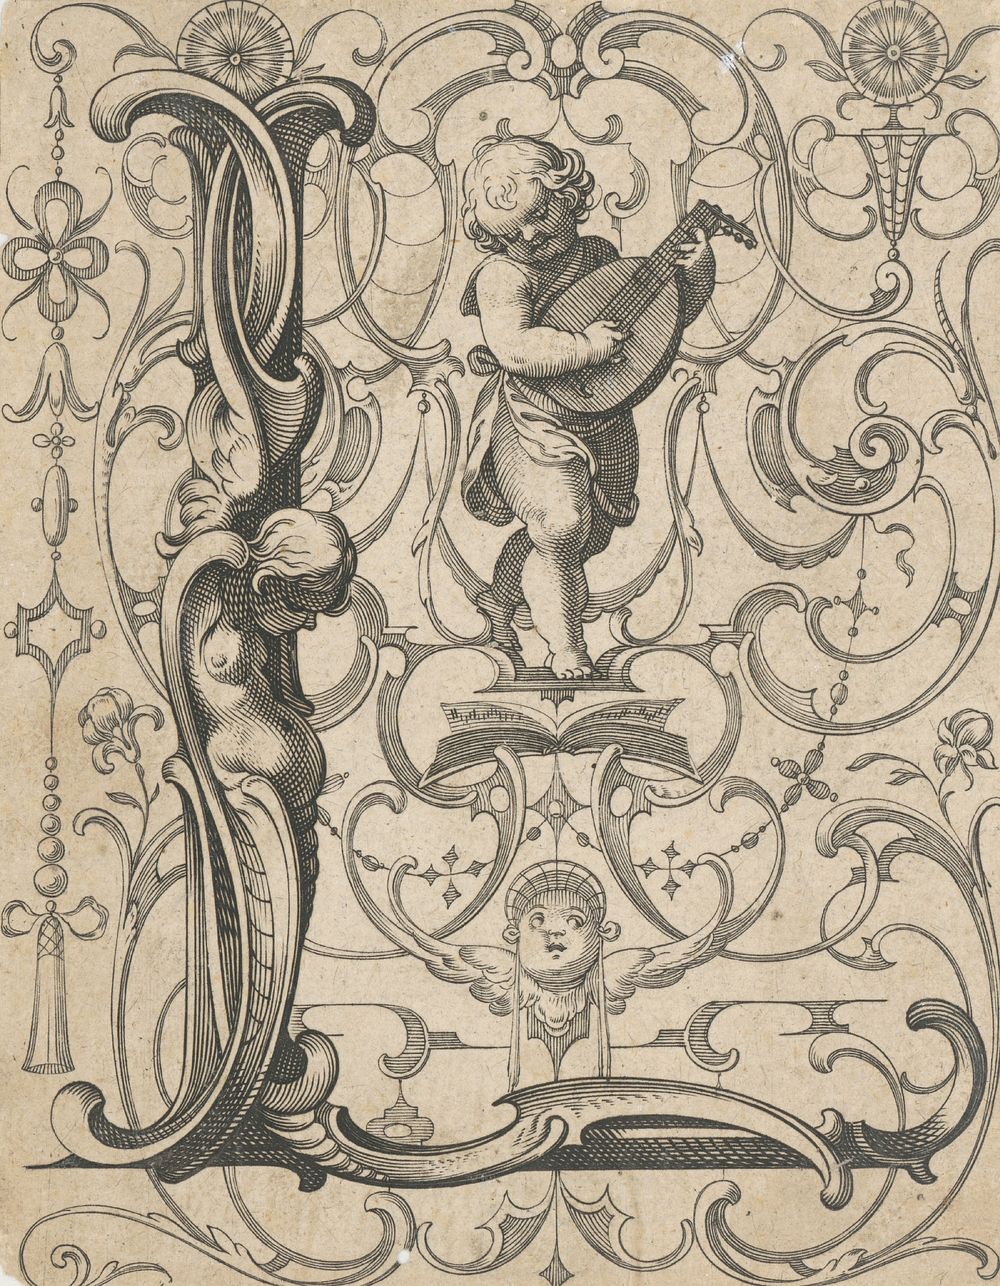 Initial l with putto playing the lute